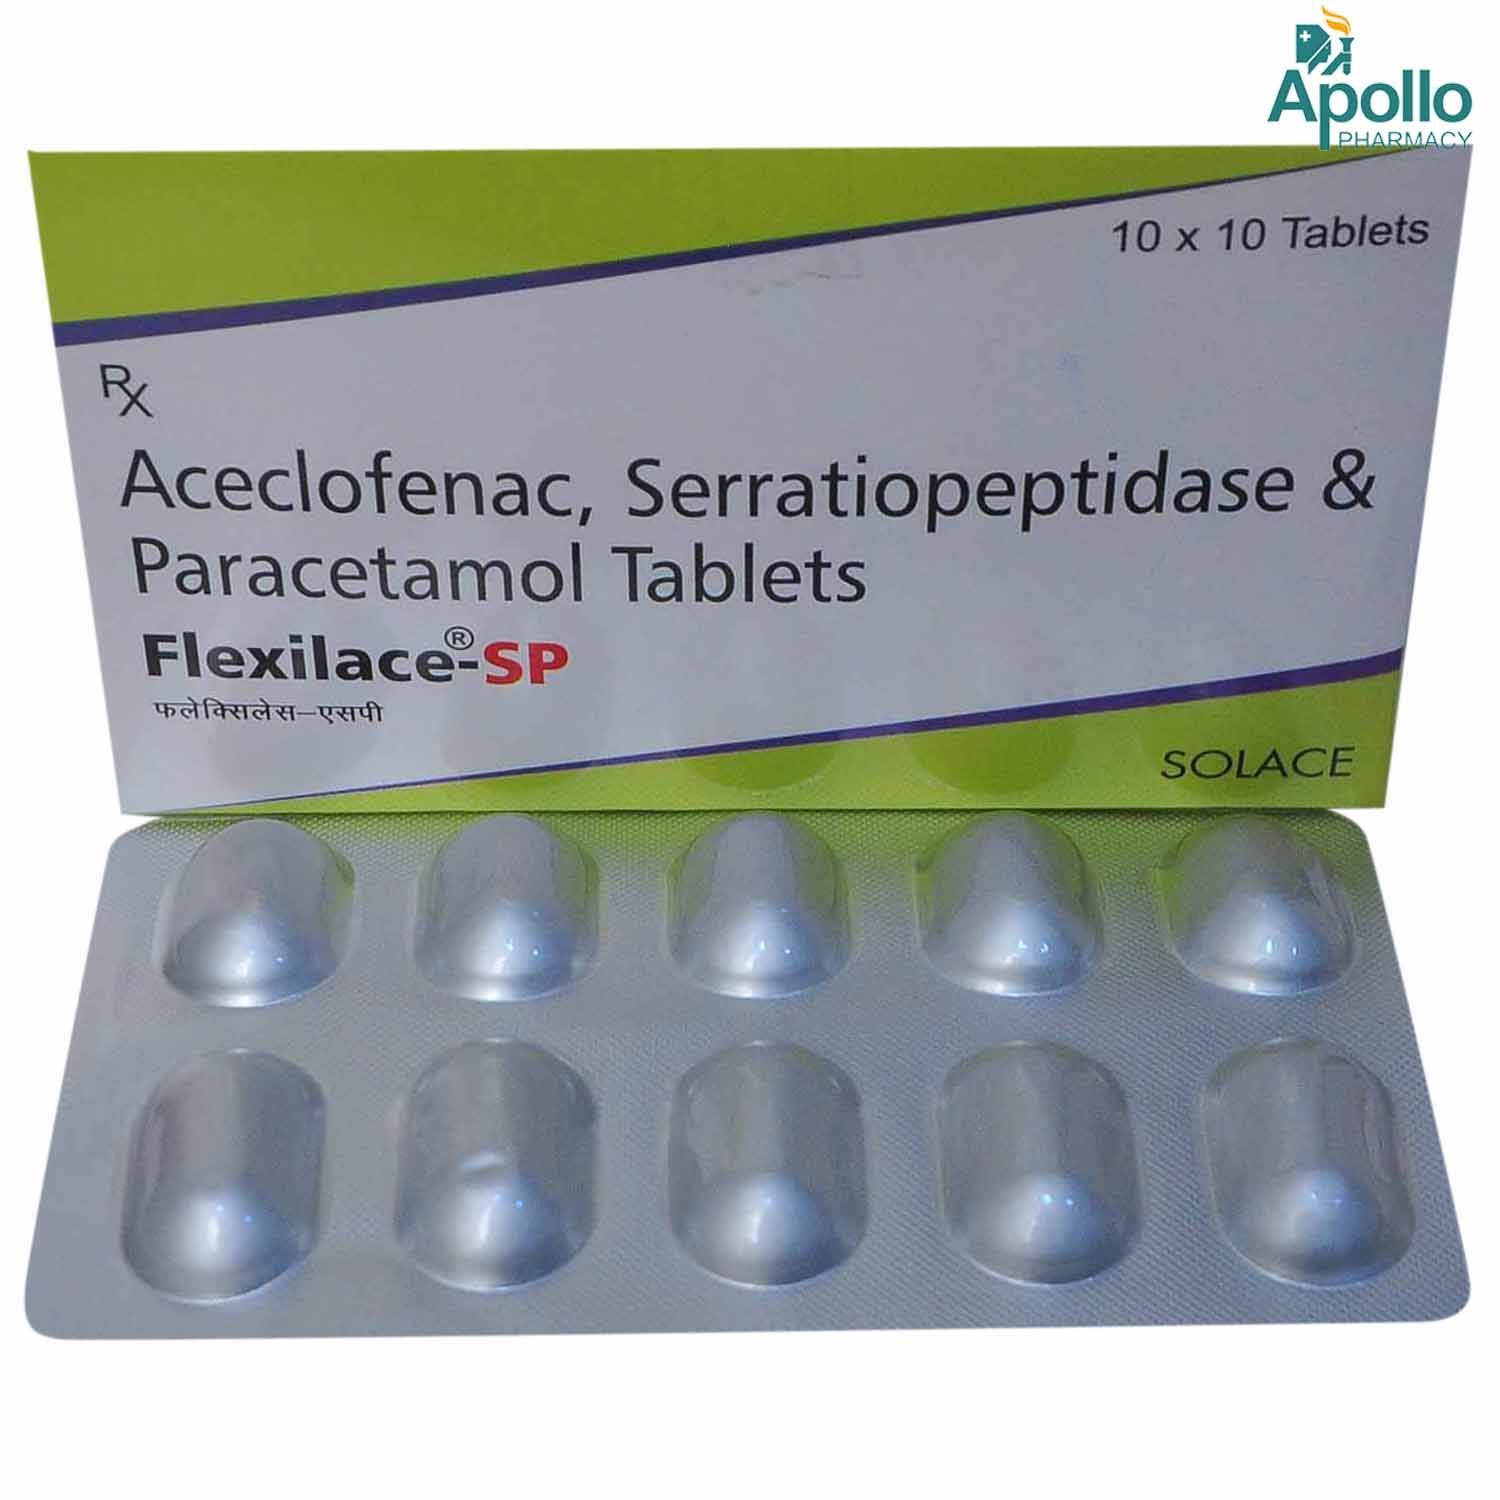 Flexilace Sp Tablet Price Uses Side Effects Composition Apollo Pharmacy